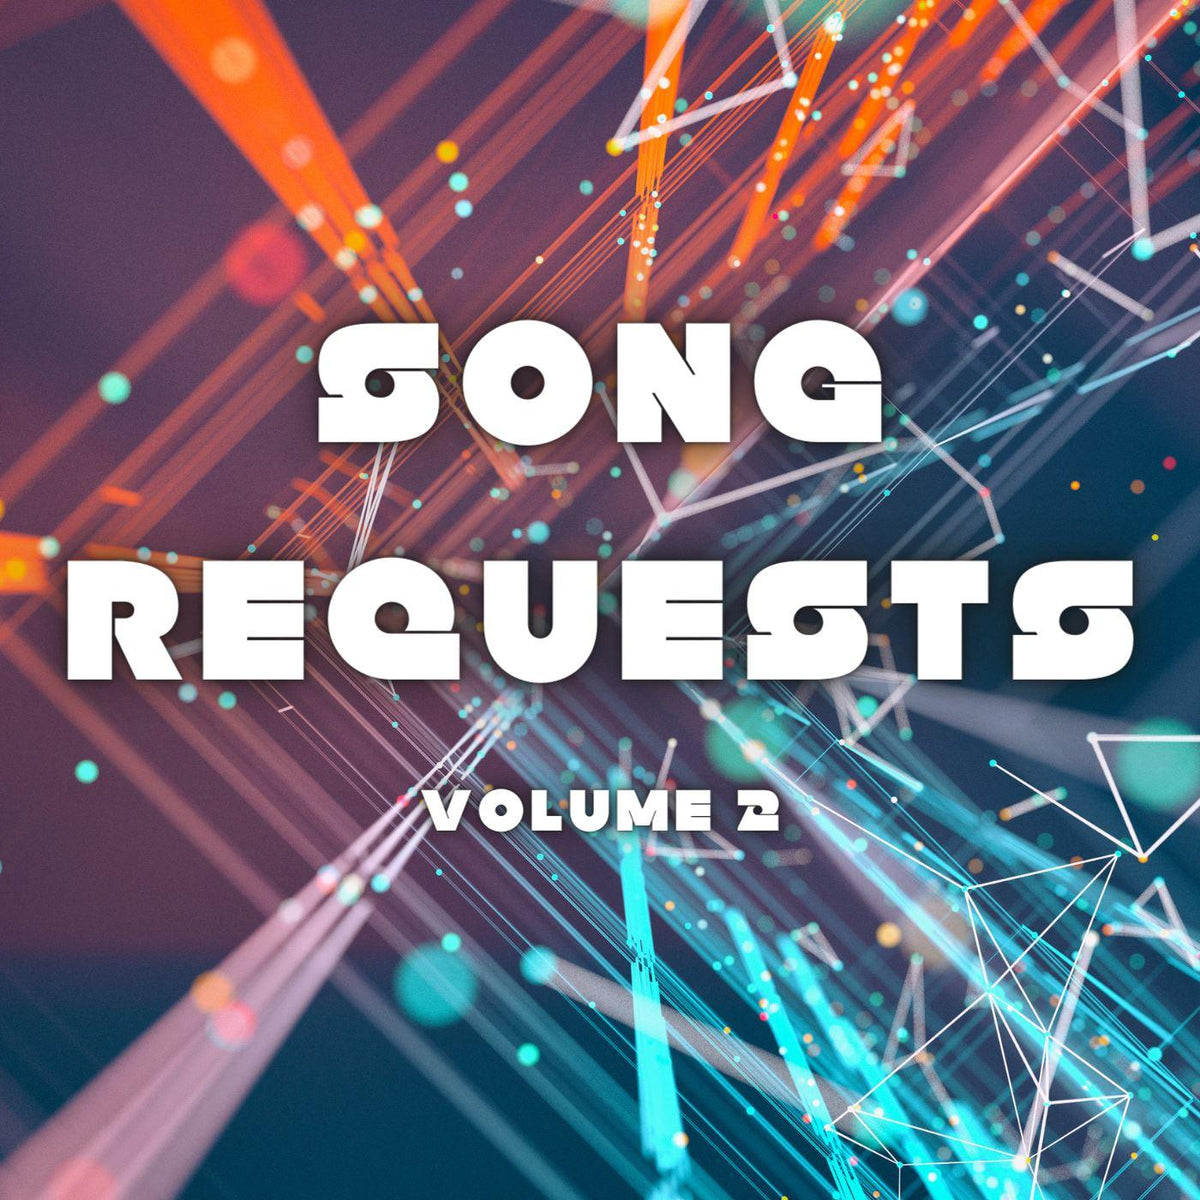 Song Requests Vol 2 Acoustic Backs And Tracks 